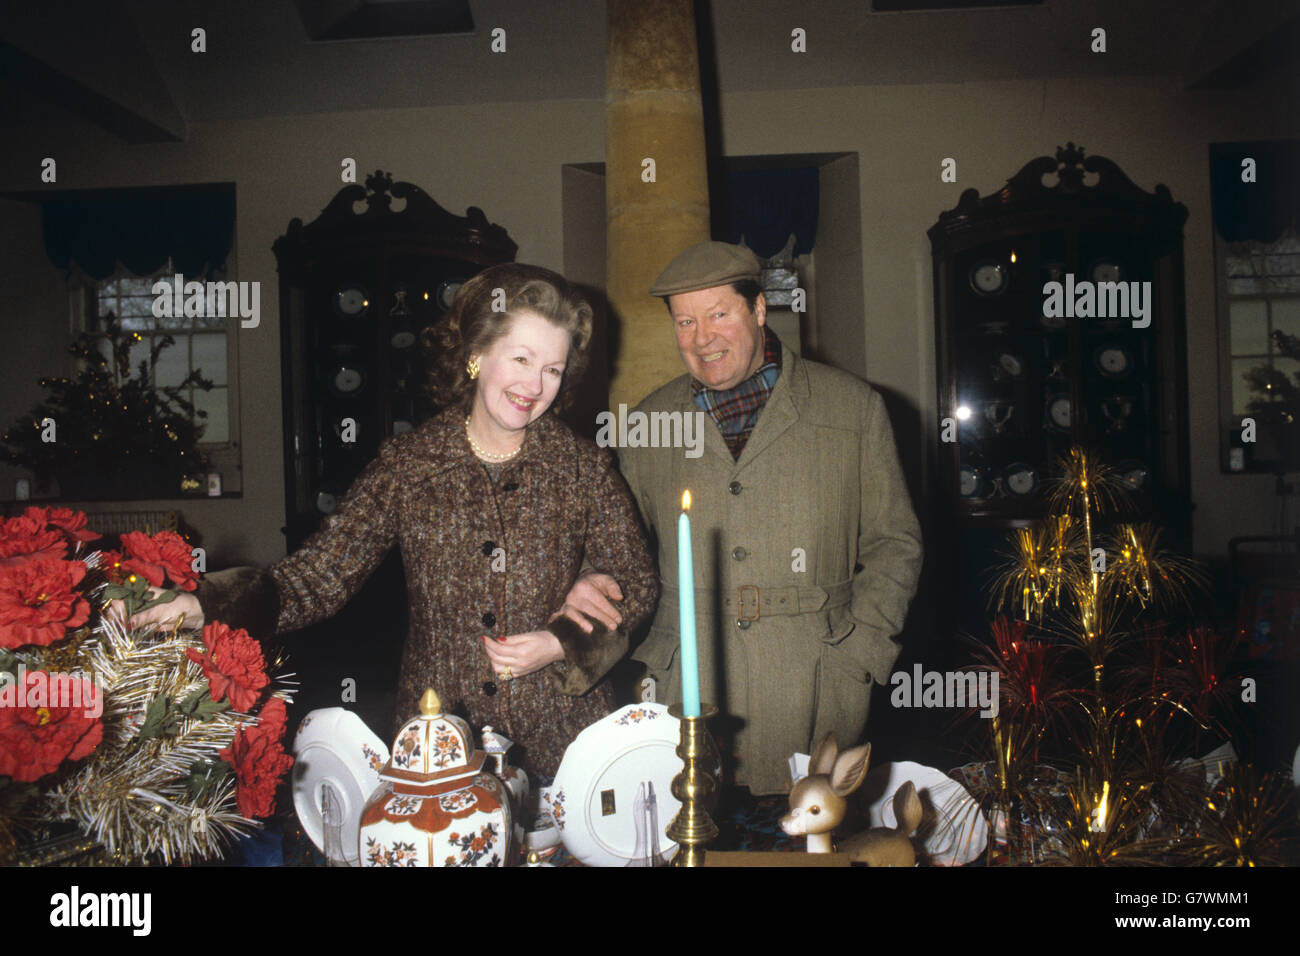 8th Earl Spencer, father of Princess Diana, with his wife, Raine Spencer, Countess Spencer, at their home at Althorp, Northamptonshire, which is open to the public. They are pictured here in the souvenir shop on the estate. Stock Photo